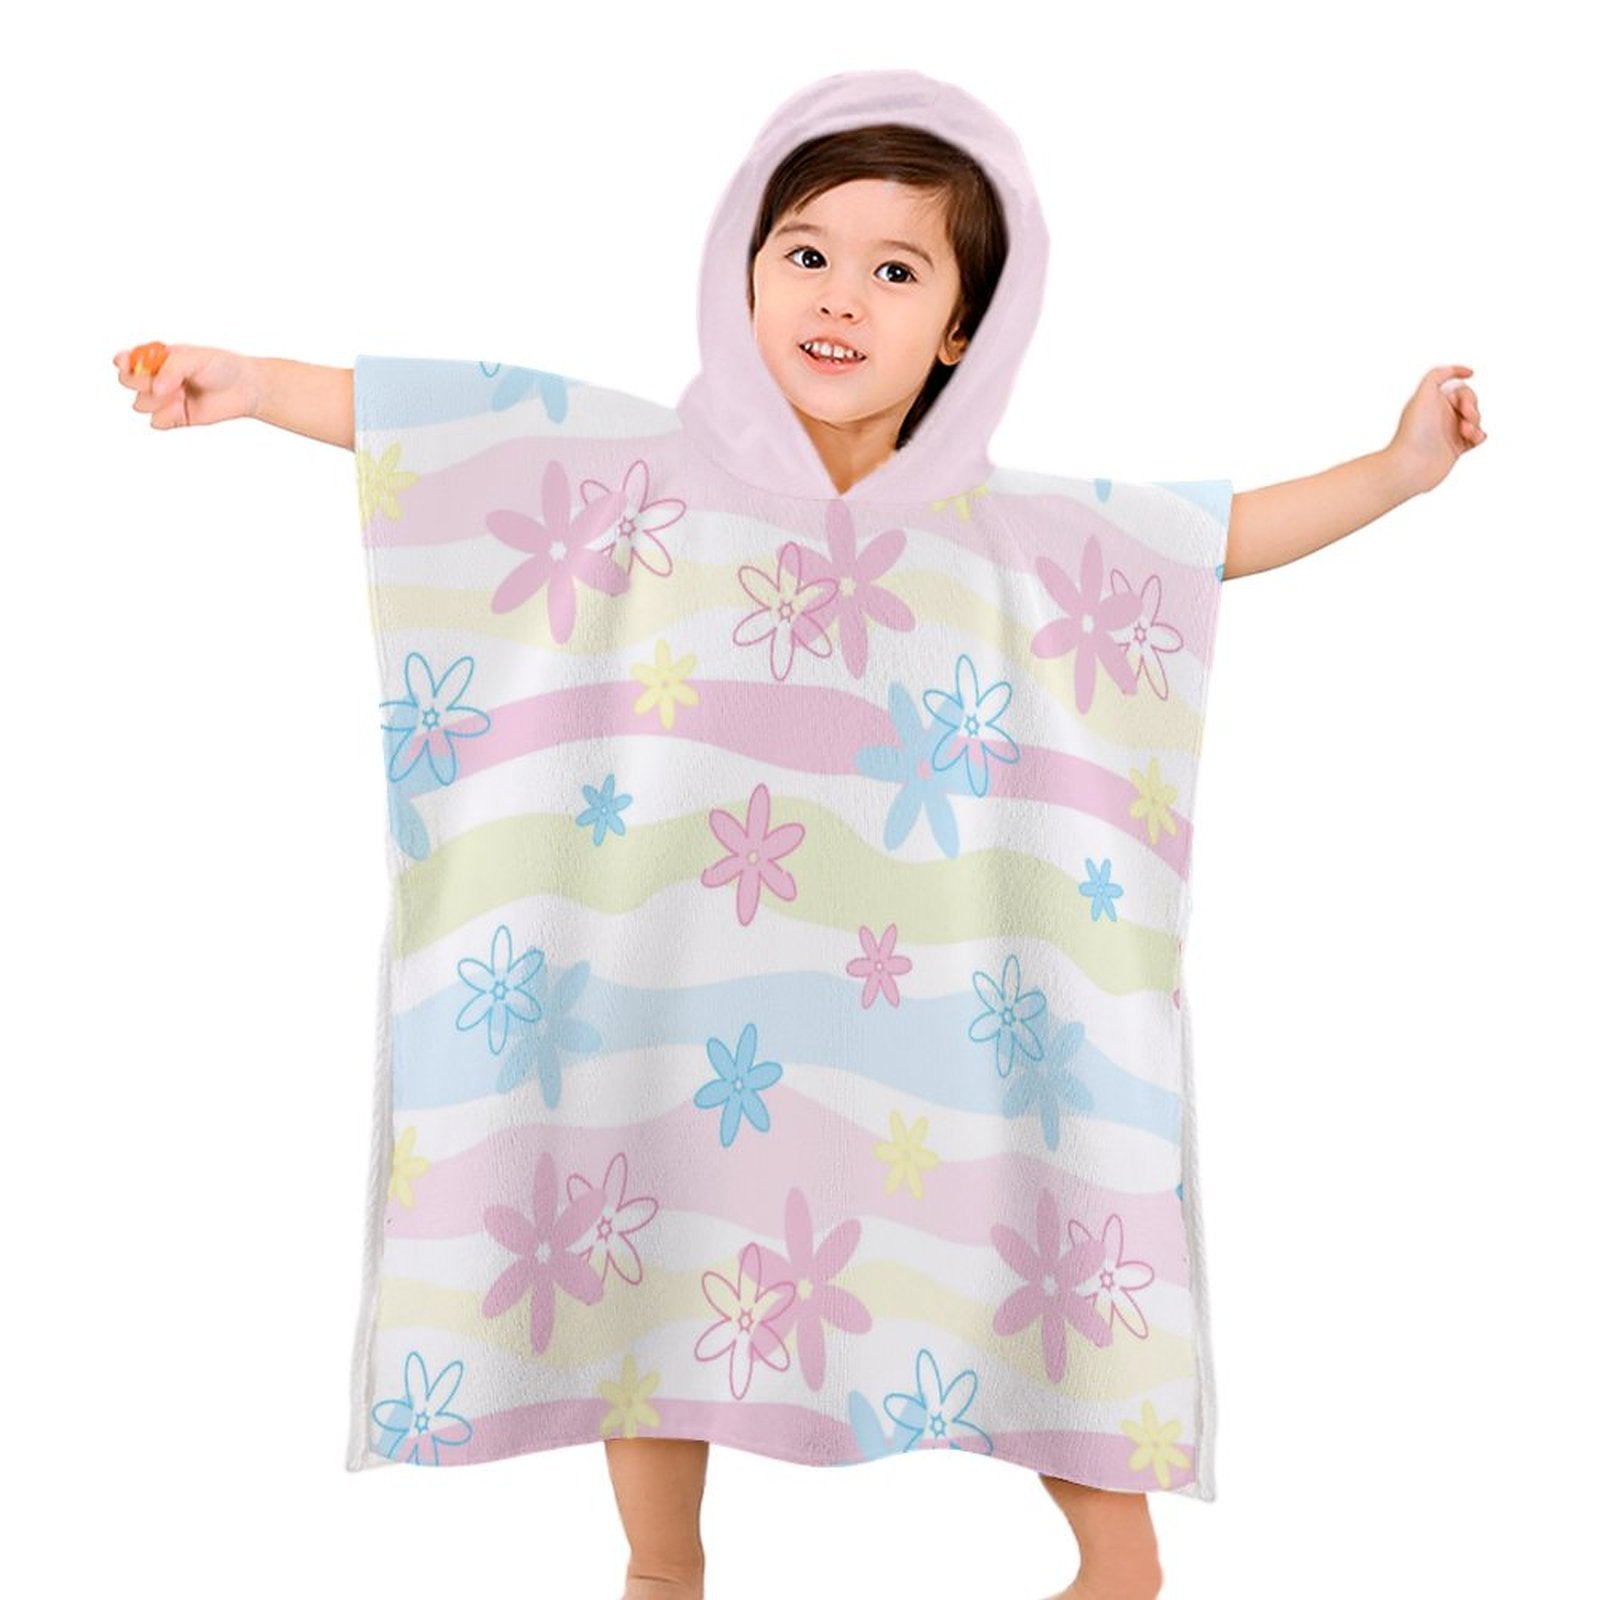 Kids Hooded Terry Cloth Towel - Candy Stripes